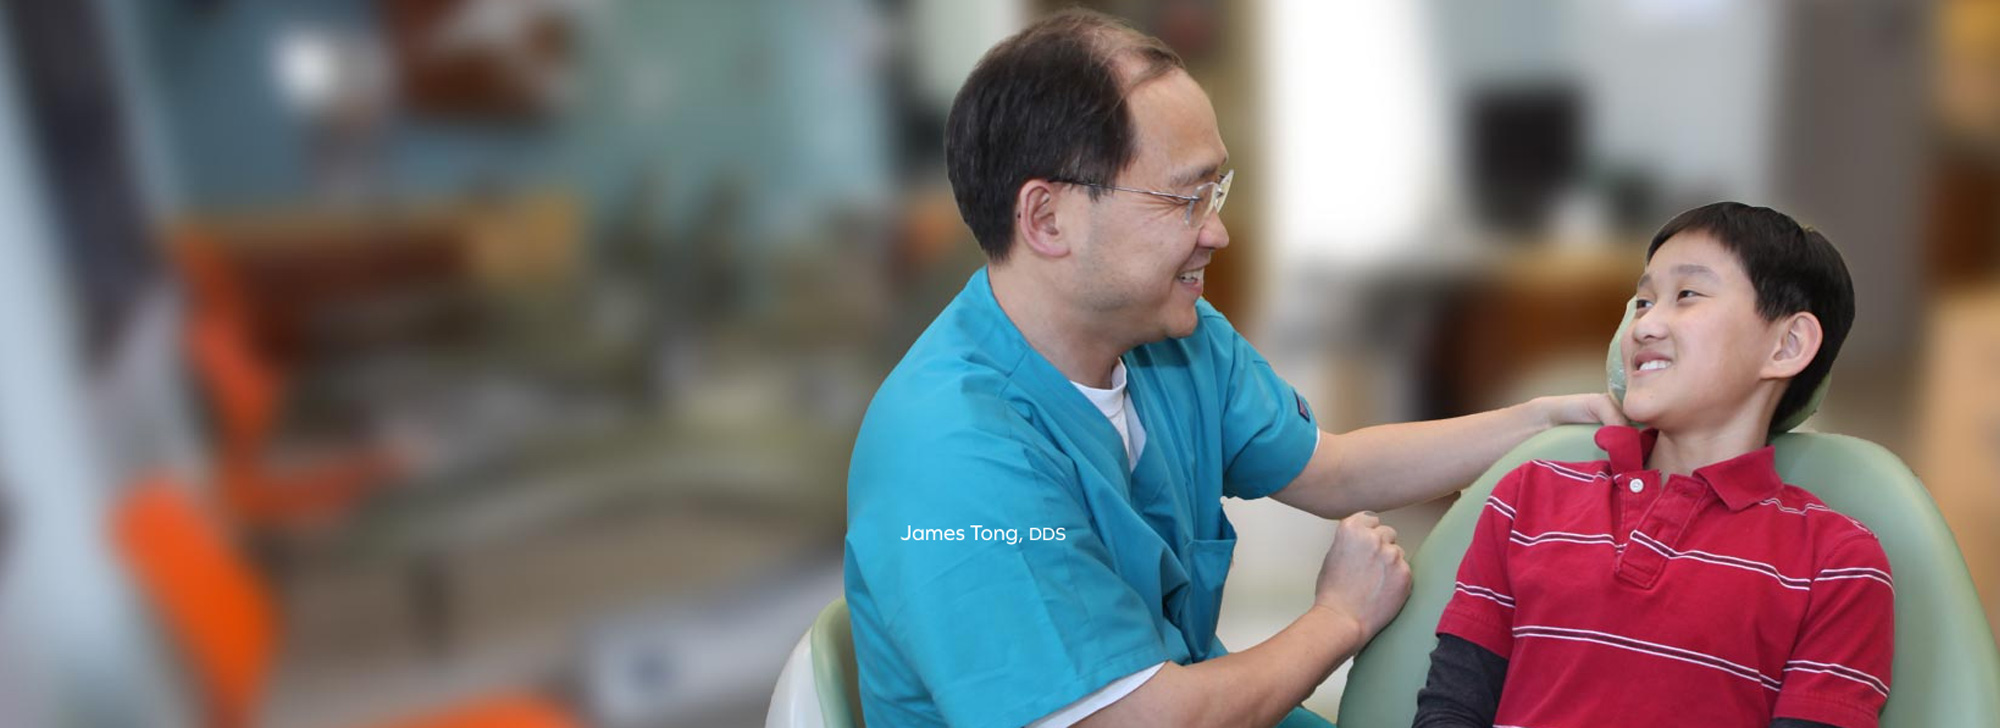 Dr. Tong with patient